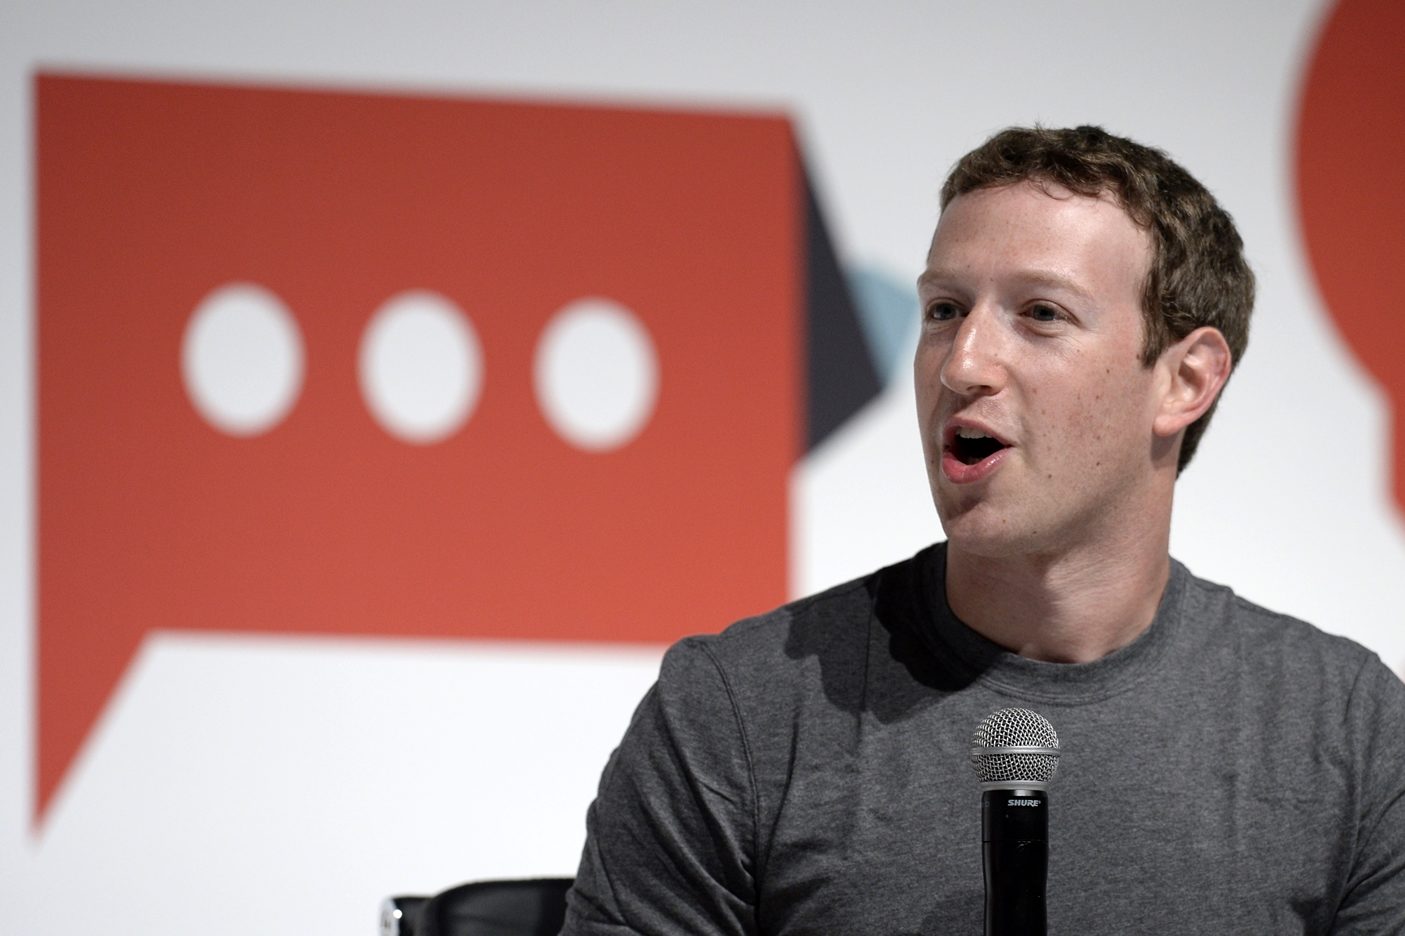 (FILES) This file photo taken on March 2, 2015 shows Facebook's creator Mark Zuckerberg  on the opening day of the 2015 Mobile World Congress (MWC) in Barcelona. Facebook chief Mark Zuckerberg on November 10, 2016 rejected the idea that bogus stories shared at the social network paved a path of victory for President-elect Donald Trump."The idea that fake news on Facebook, which is a very small amount of the content, influenced the election in any way I think is a pretty crazy idea," Zuckerberg said during an on-stage chat at a Technonomy technology trends conference in California.  / AFP PHOTO / LLUIS GENE